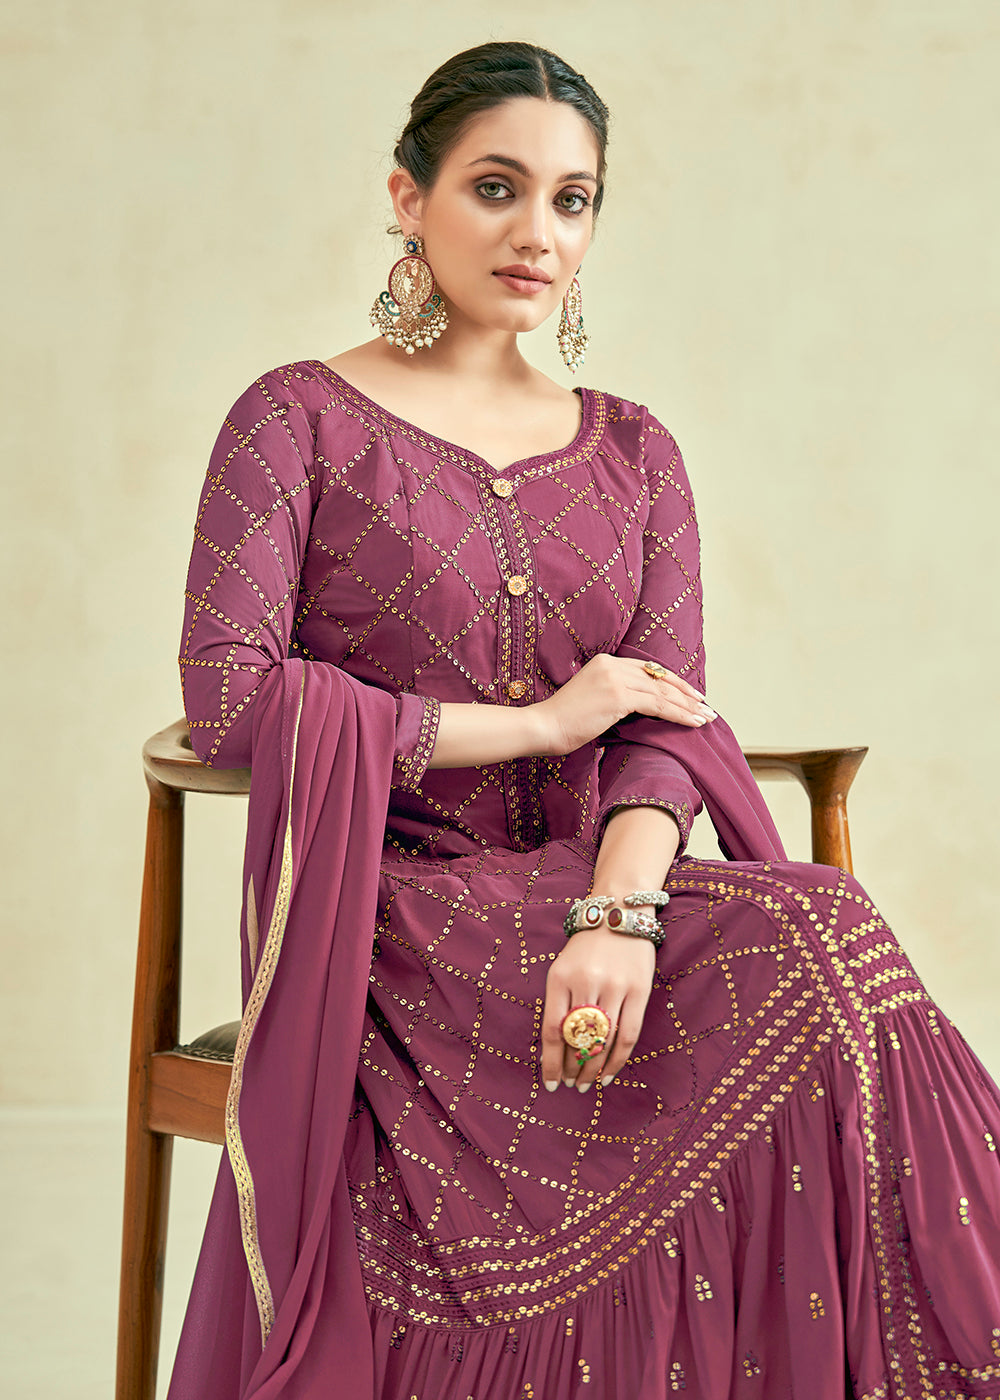 Buy Now Mauve Real Georgette with Sequins Wedding Festive Gown Online in USA, UK, Australia, Canada & Worldwide at Empress Clothing.